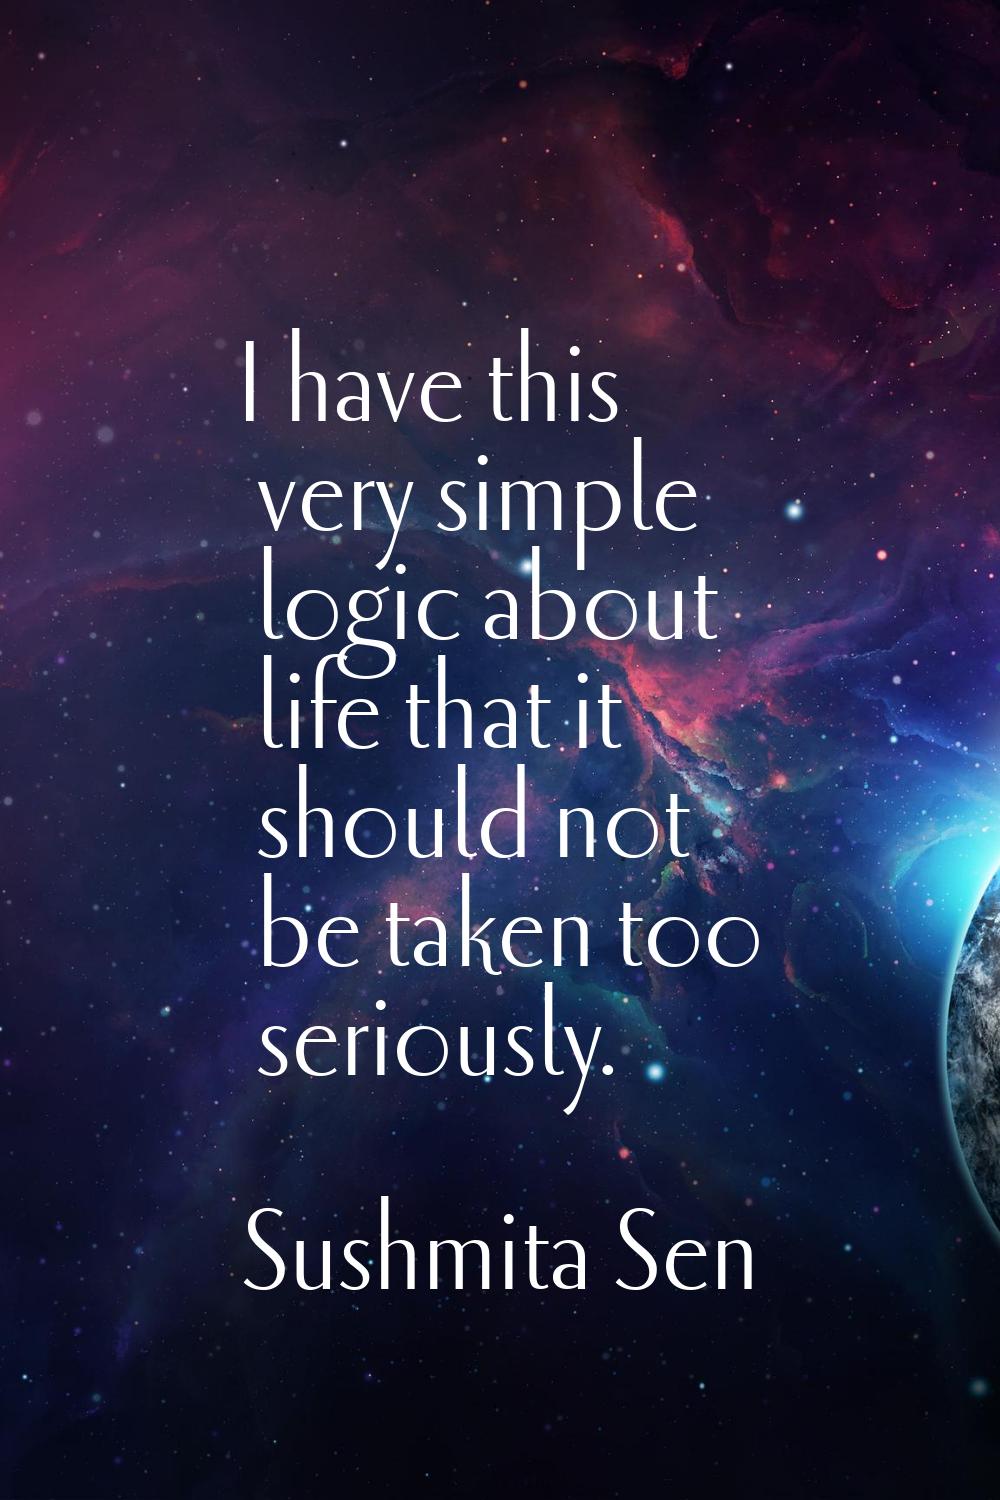 I have this very simple logic about life that it should not be taken too seriously.